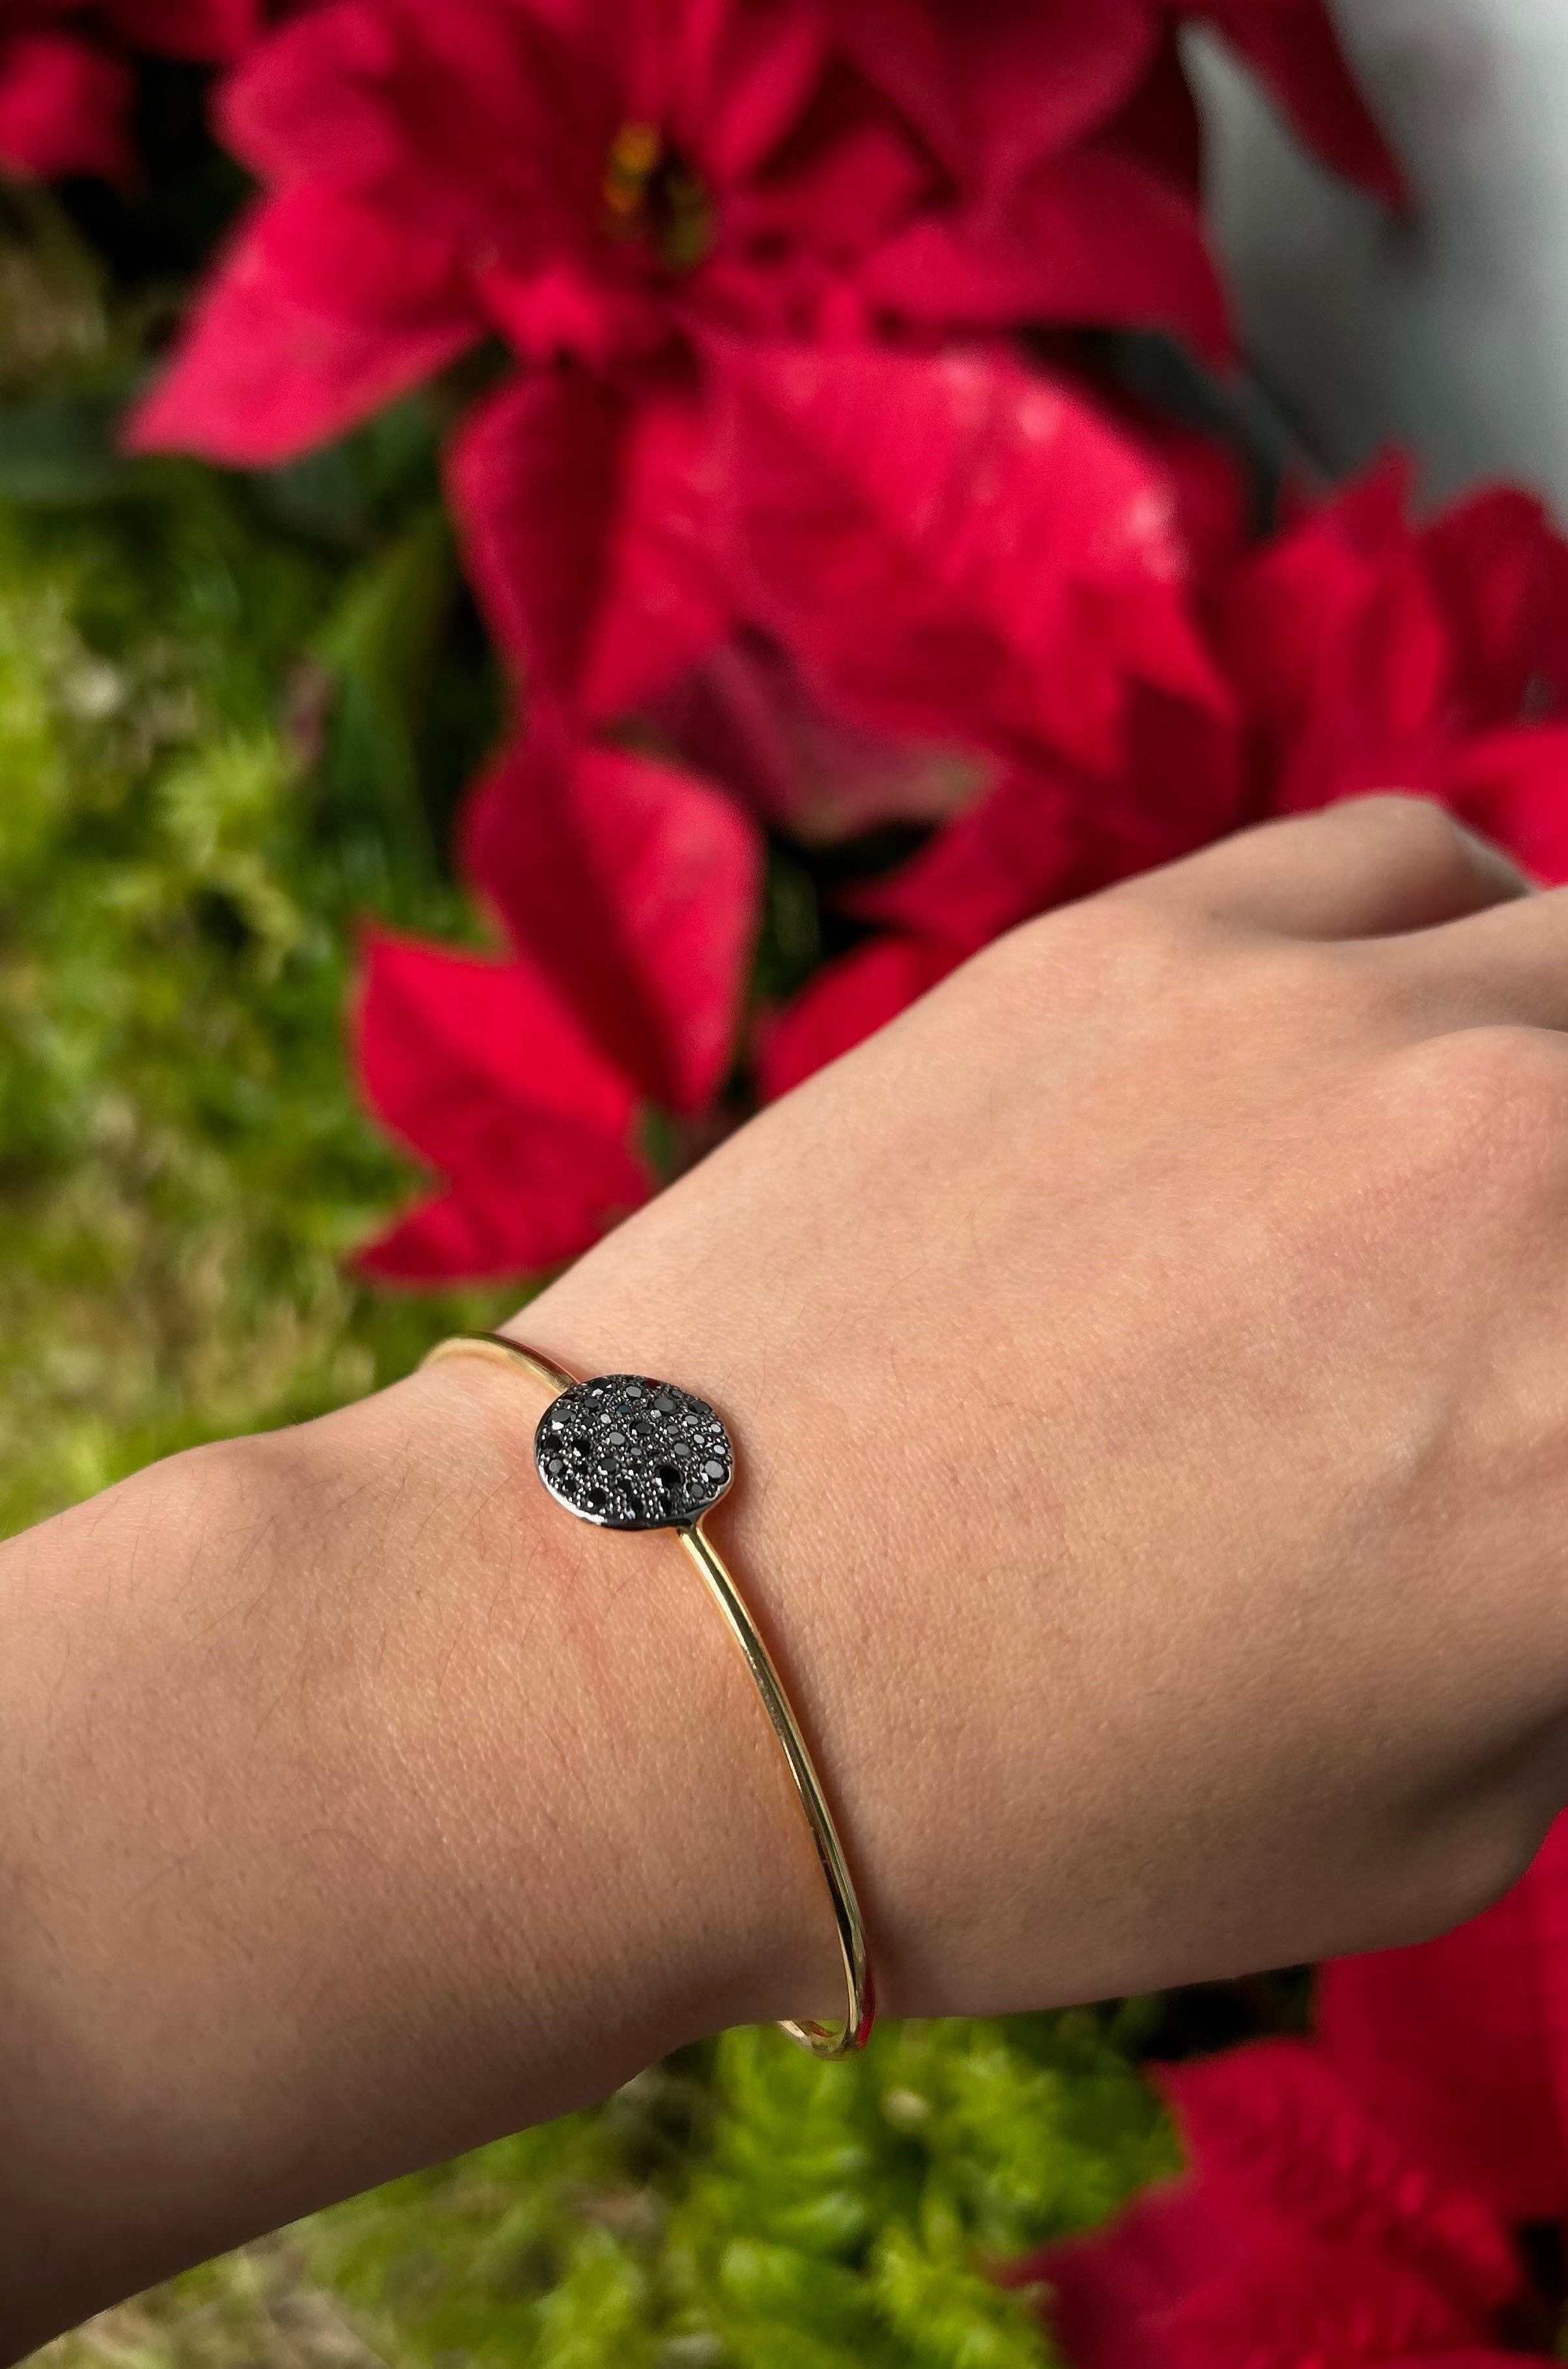 A pave of diamonds conjures images of sand sparking in the sun off the shores of the Mediterranean with this bangle bracelet from Pomellato. This slender bangle will embellish your wrist in all the right ways. Add to your collection today!

Style: